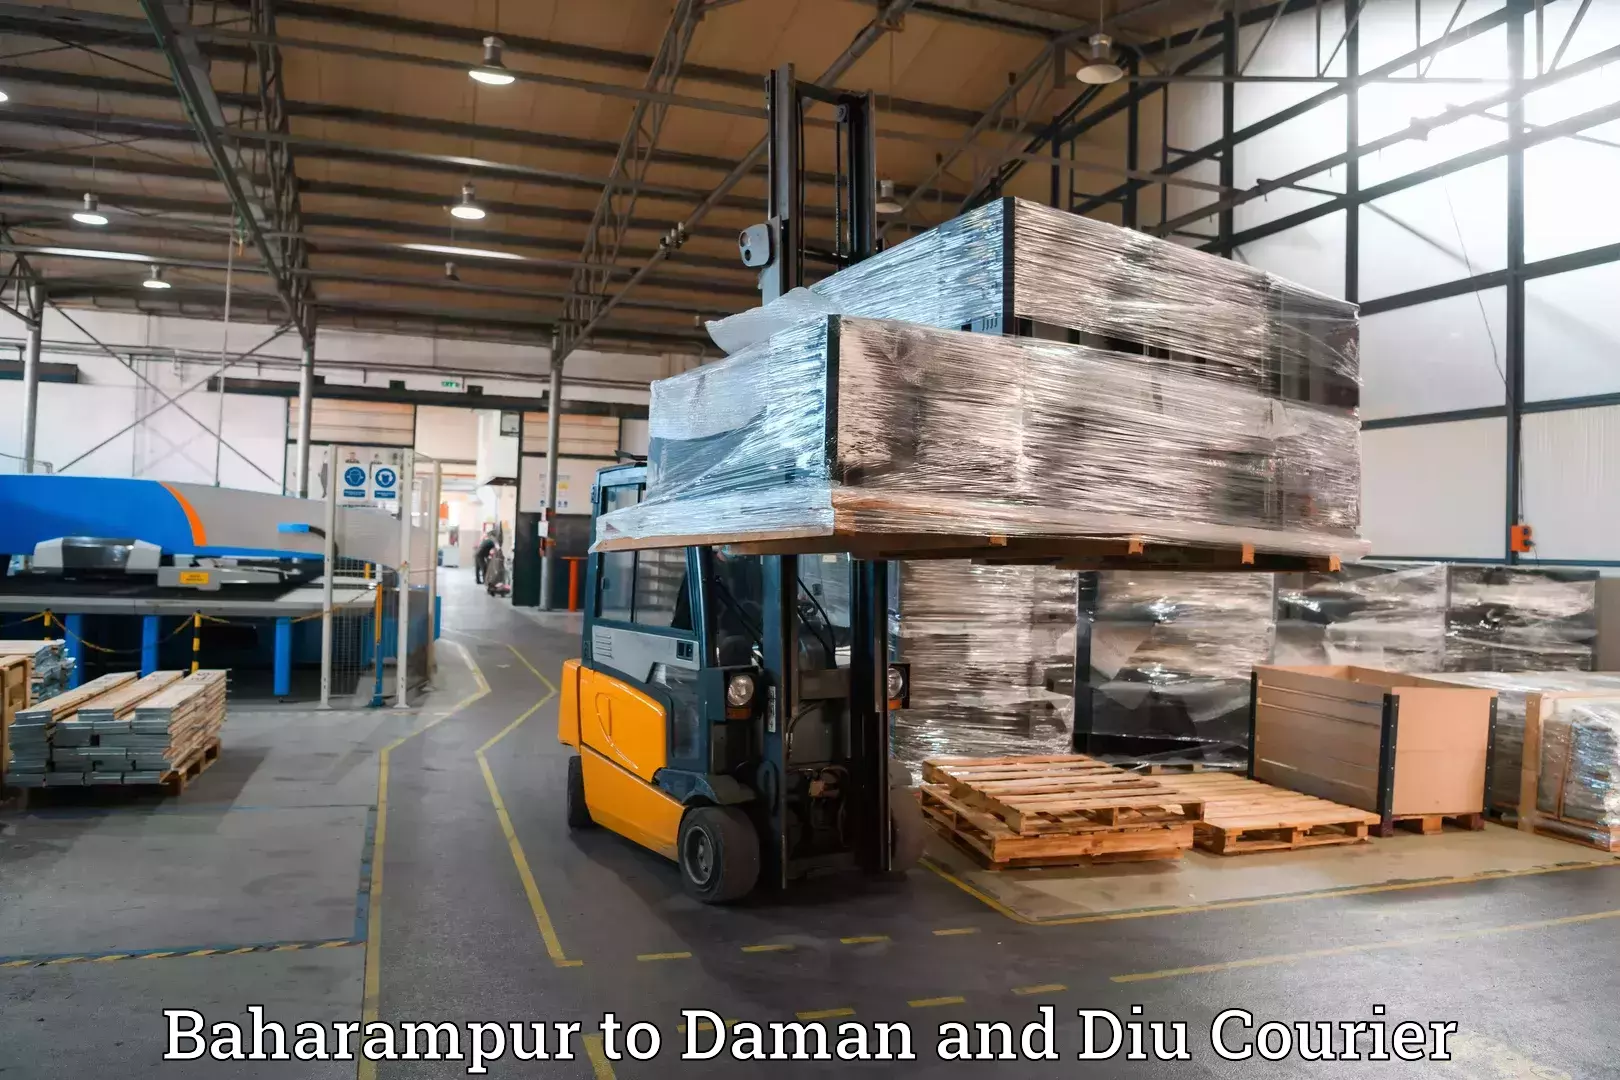 Luggage shipment specialists Baharampur to Daman